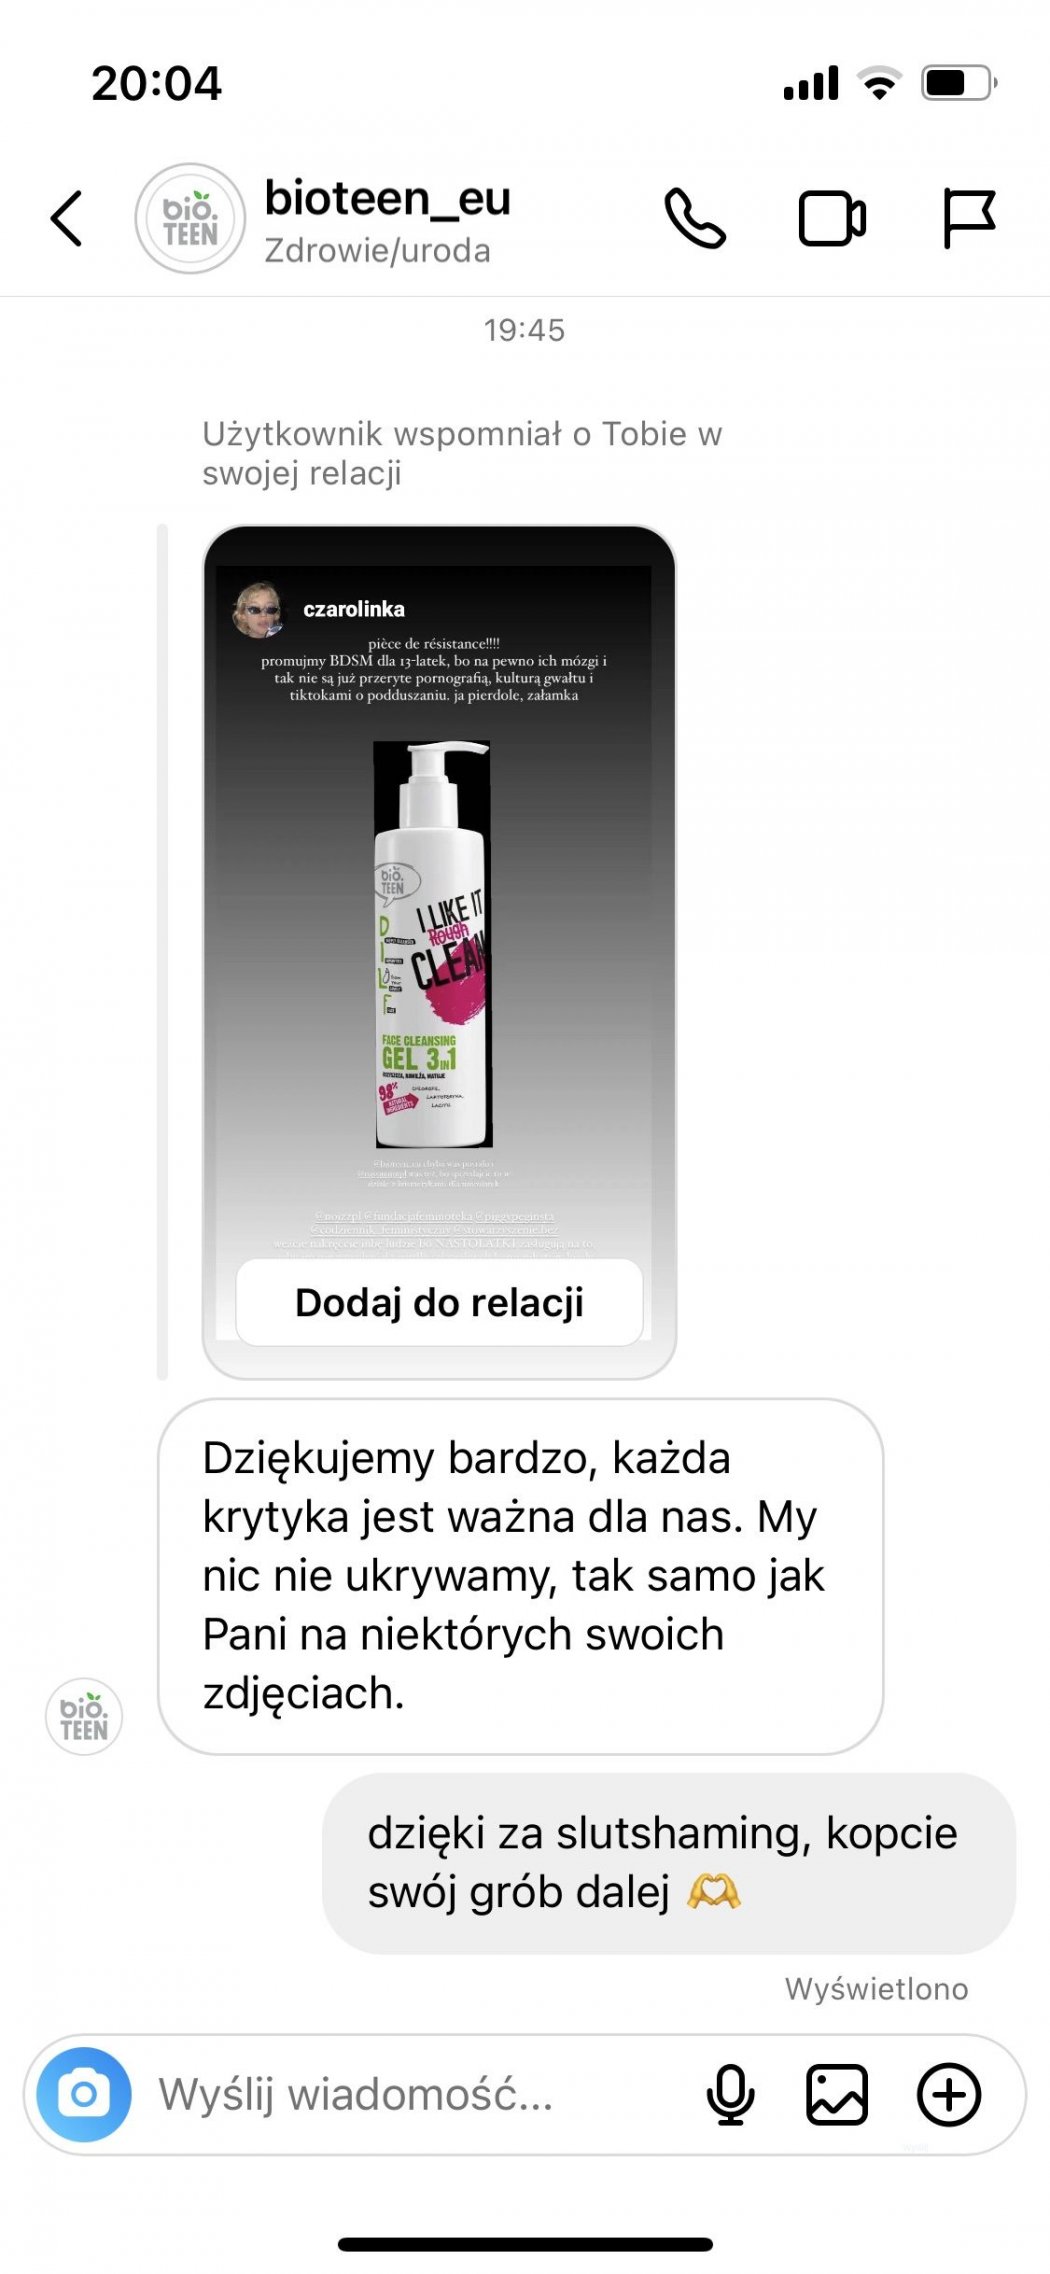 Polish drugstore chain withdraws teen cosmetics line after sexual branding backlash